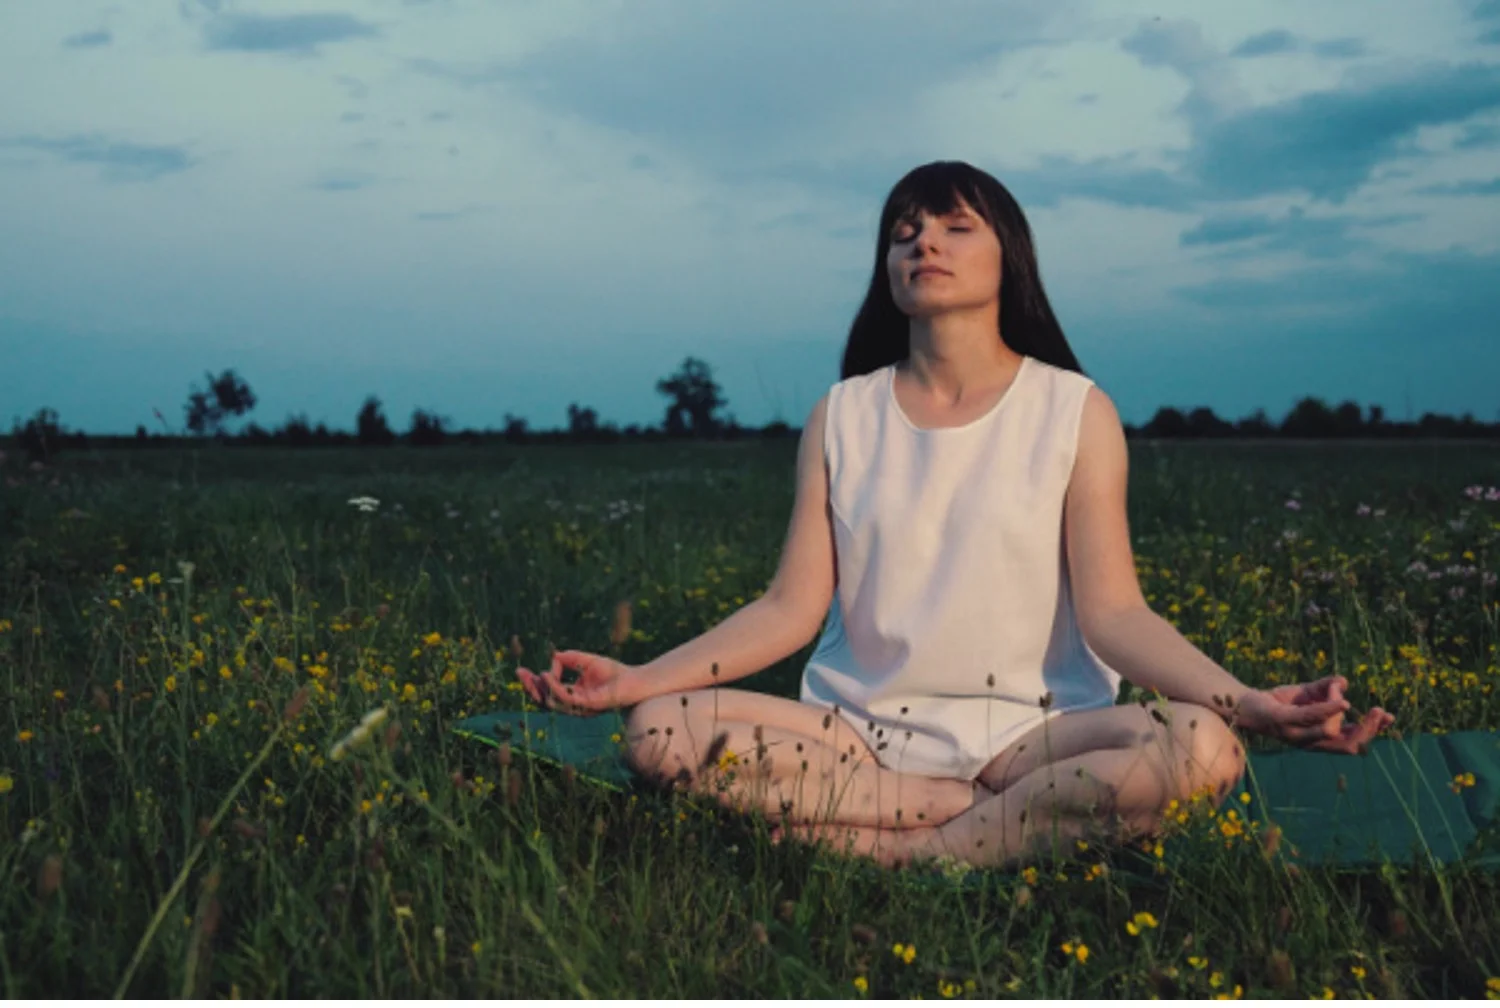 Young woman meditates peacefully in a grass field